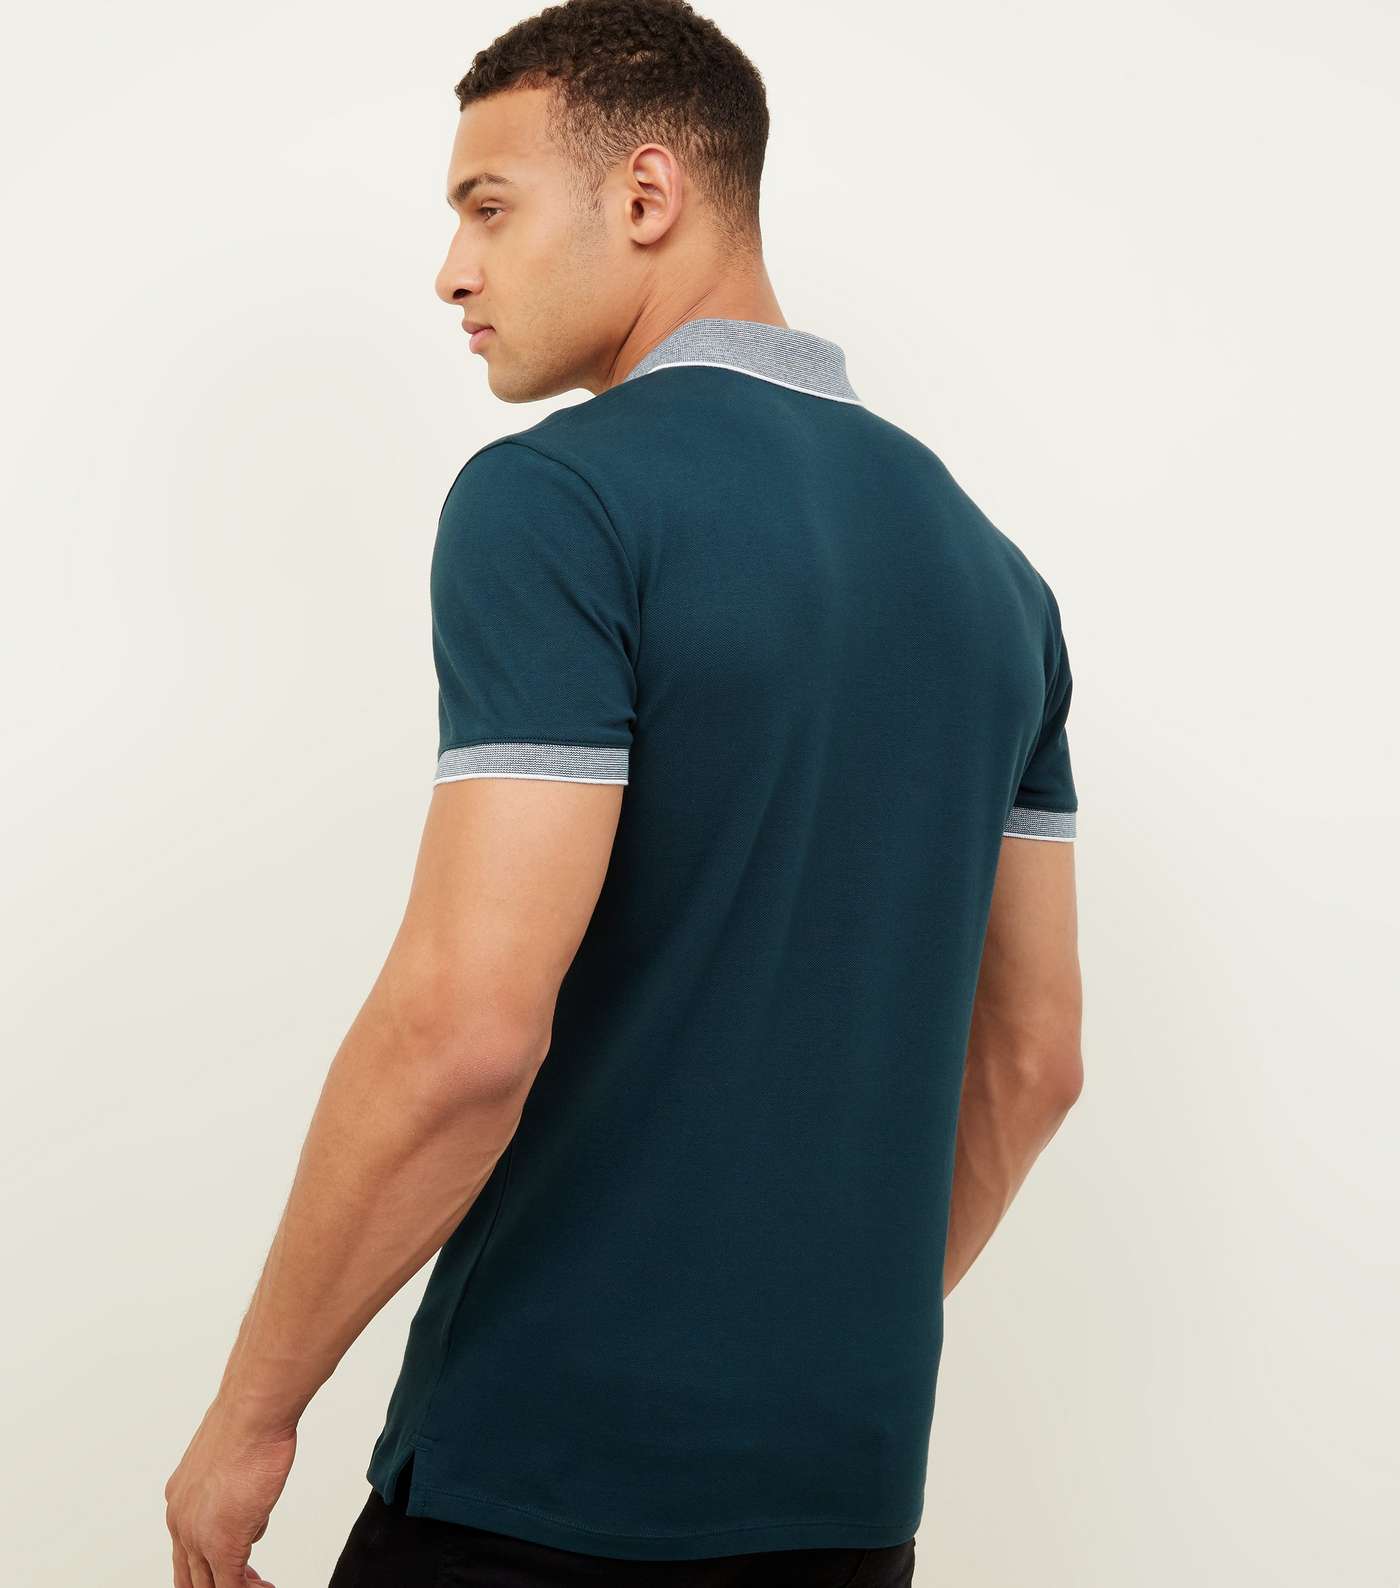 Teal Stripe Collar Muscle Fit Polo Shirt Image 3